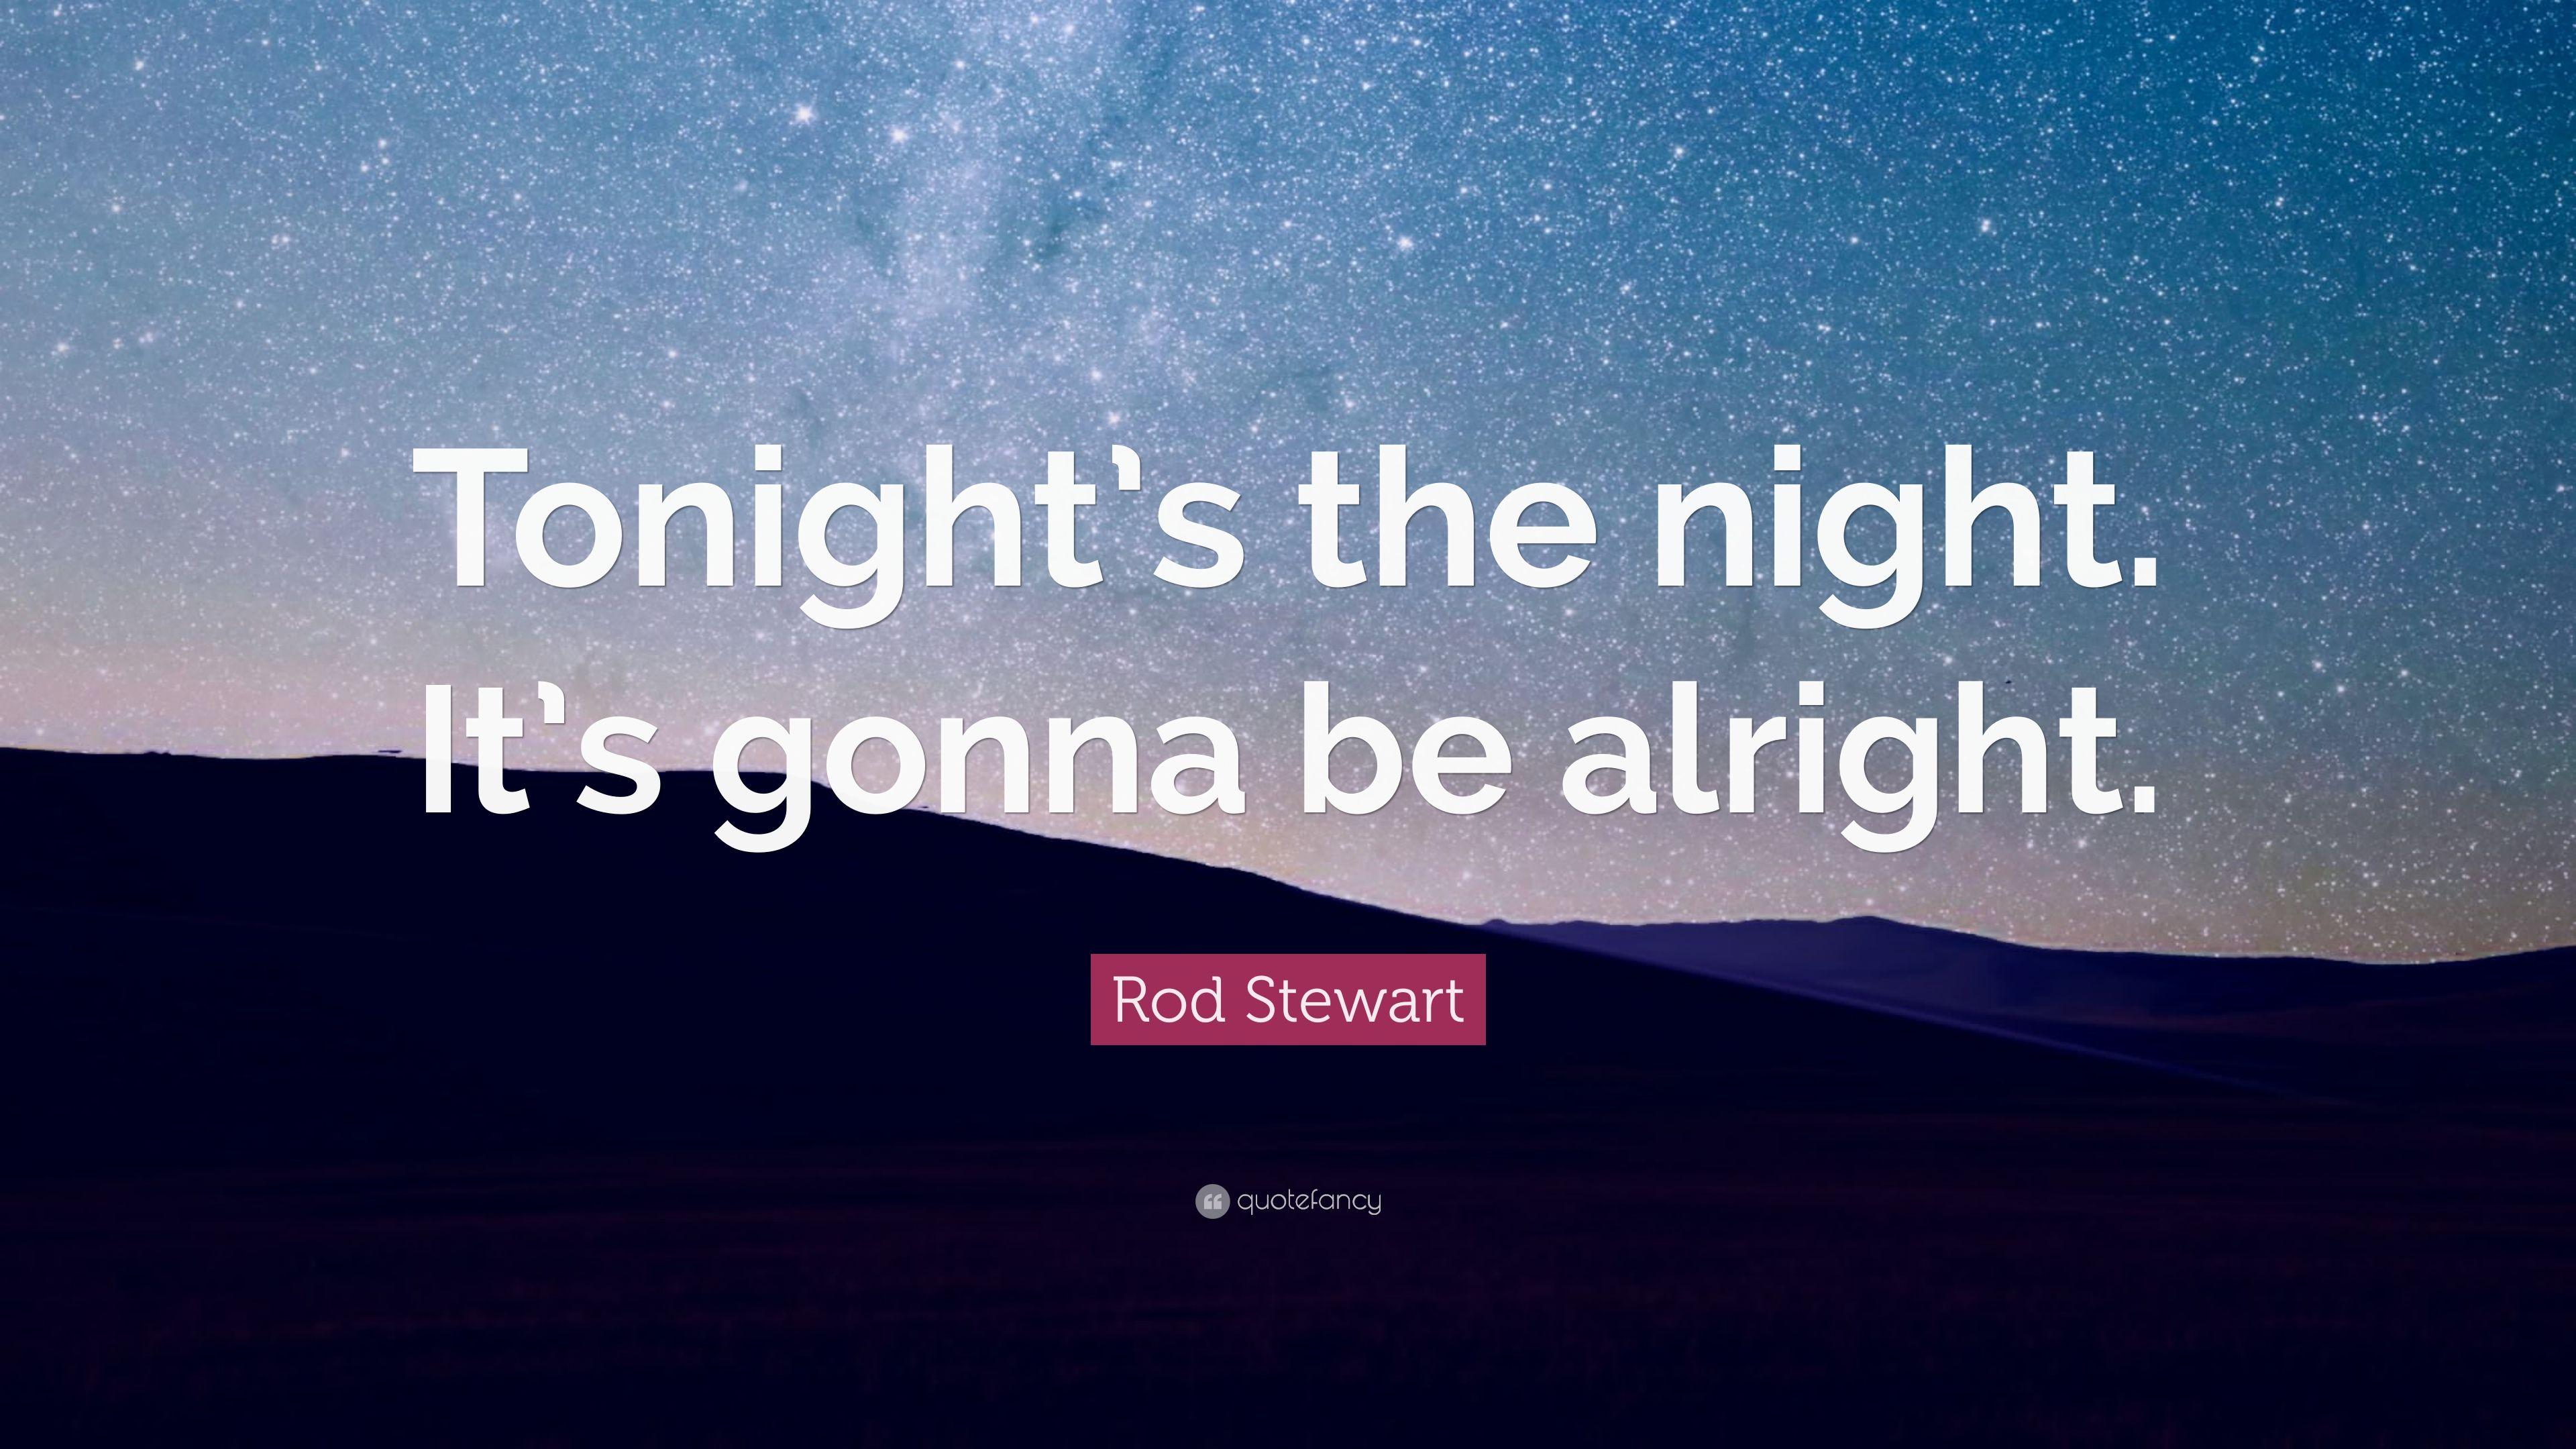 Rod Stewart Quote: “Tonight's the night. It's gonna be alright